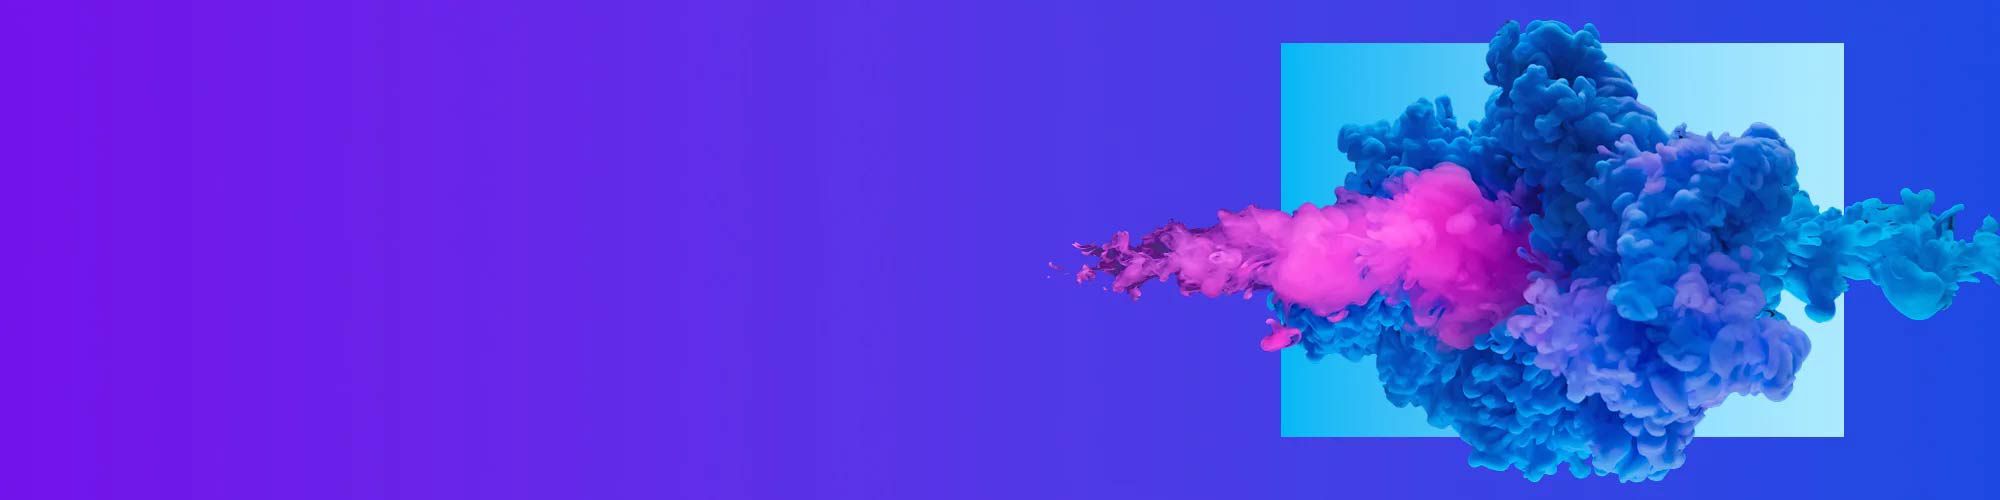 Abstract pink cloud on blue background